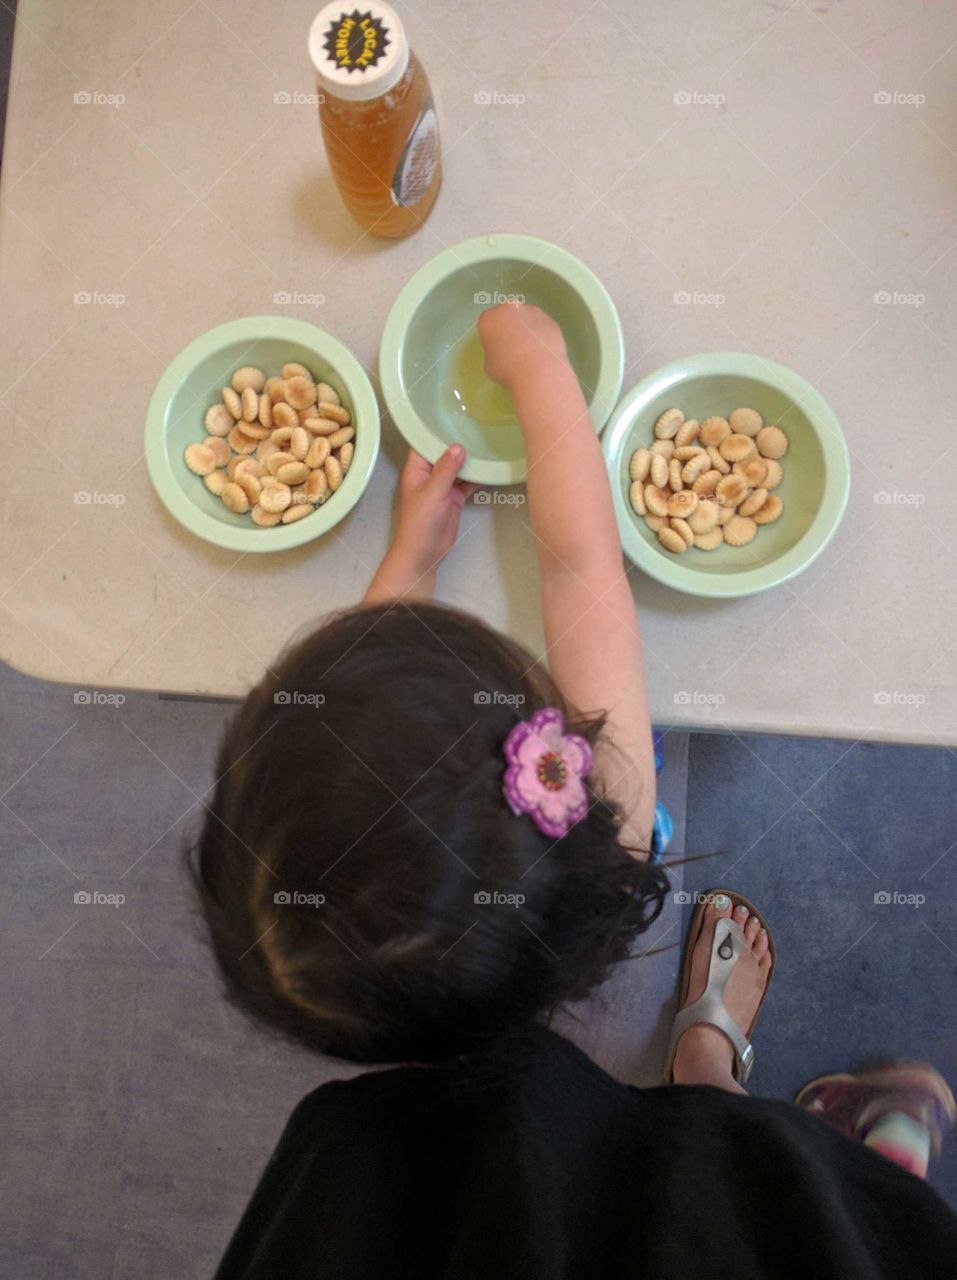 Small child samples different flavors of honey.